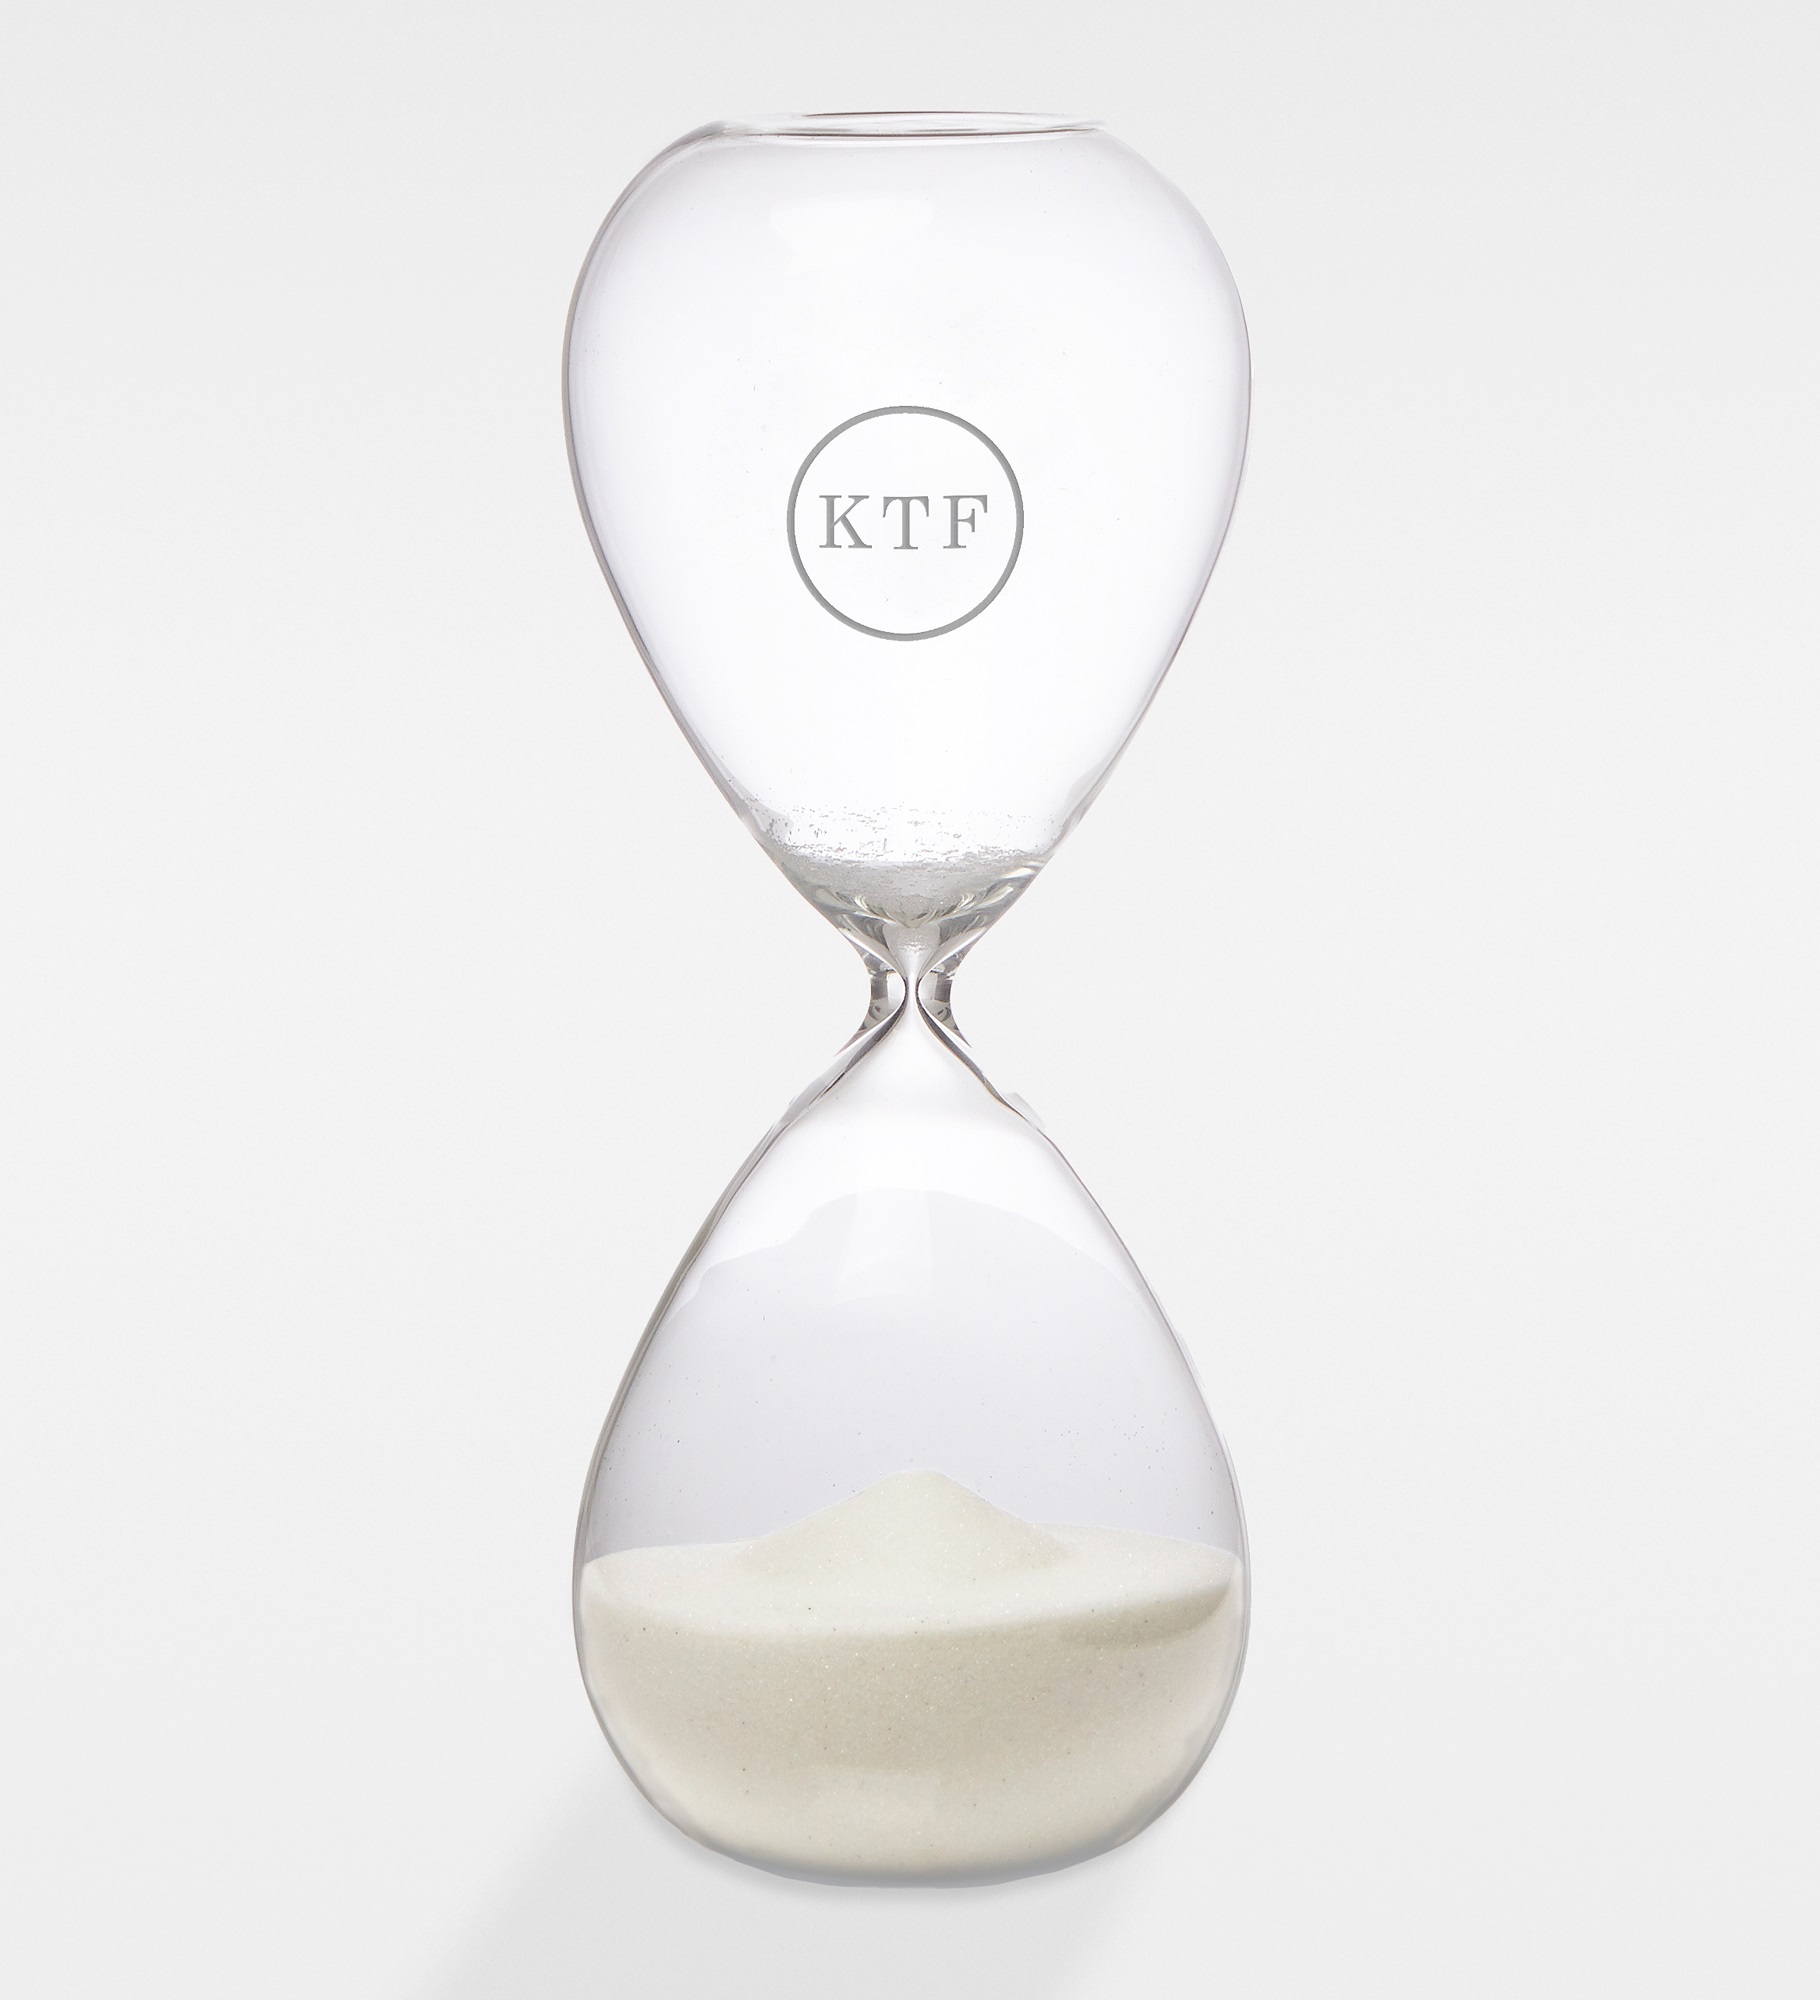  Engraved Graduation Sand-Filled Hourglass